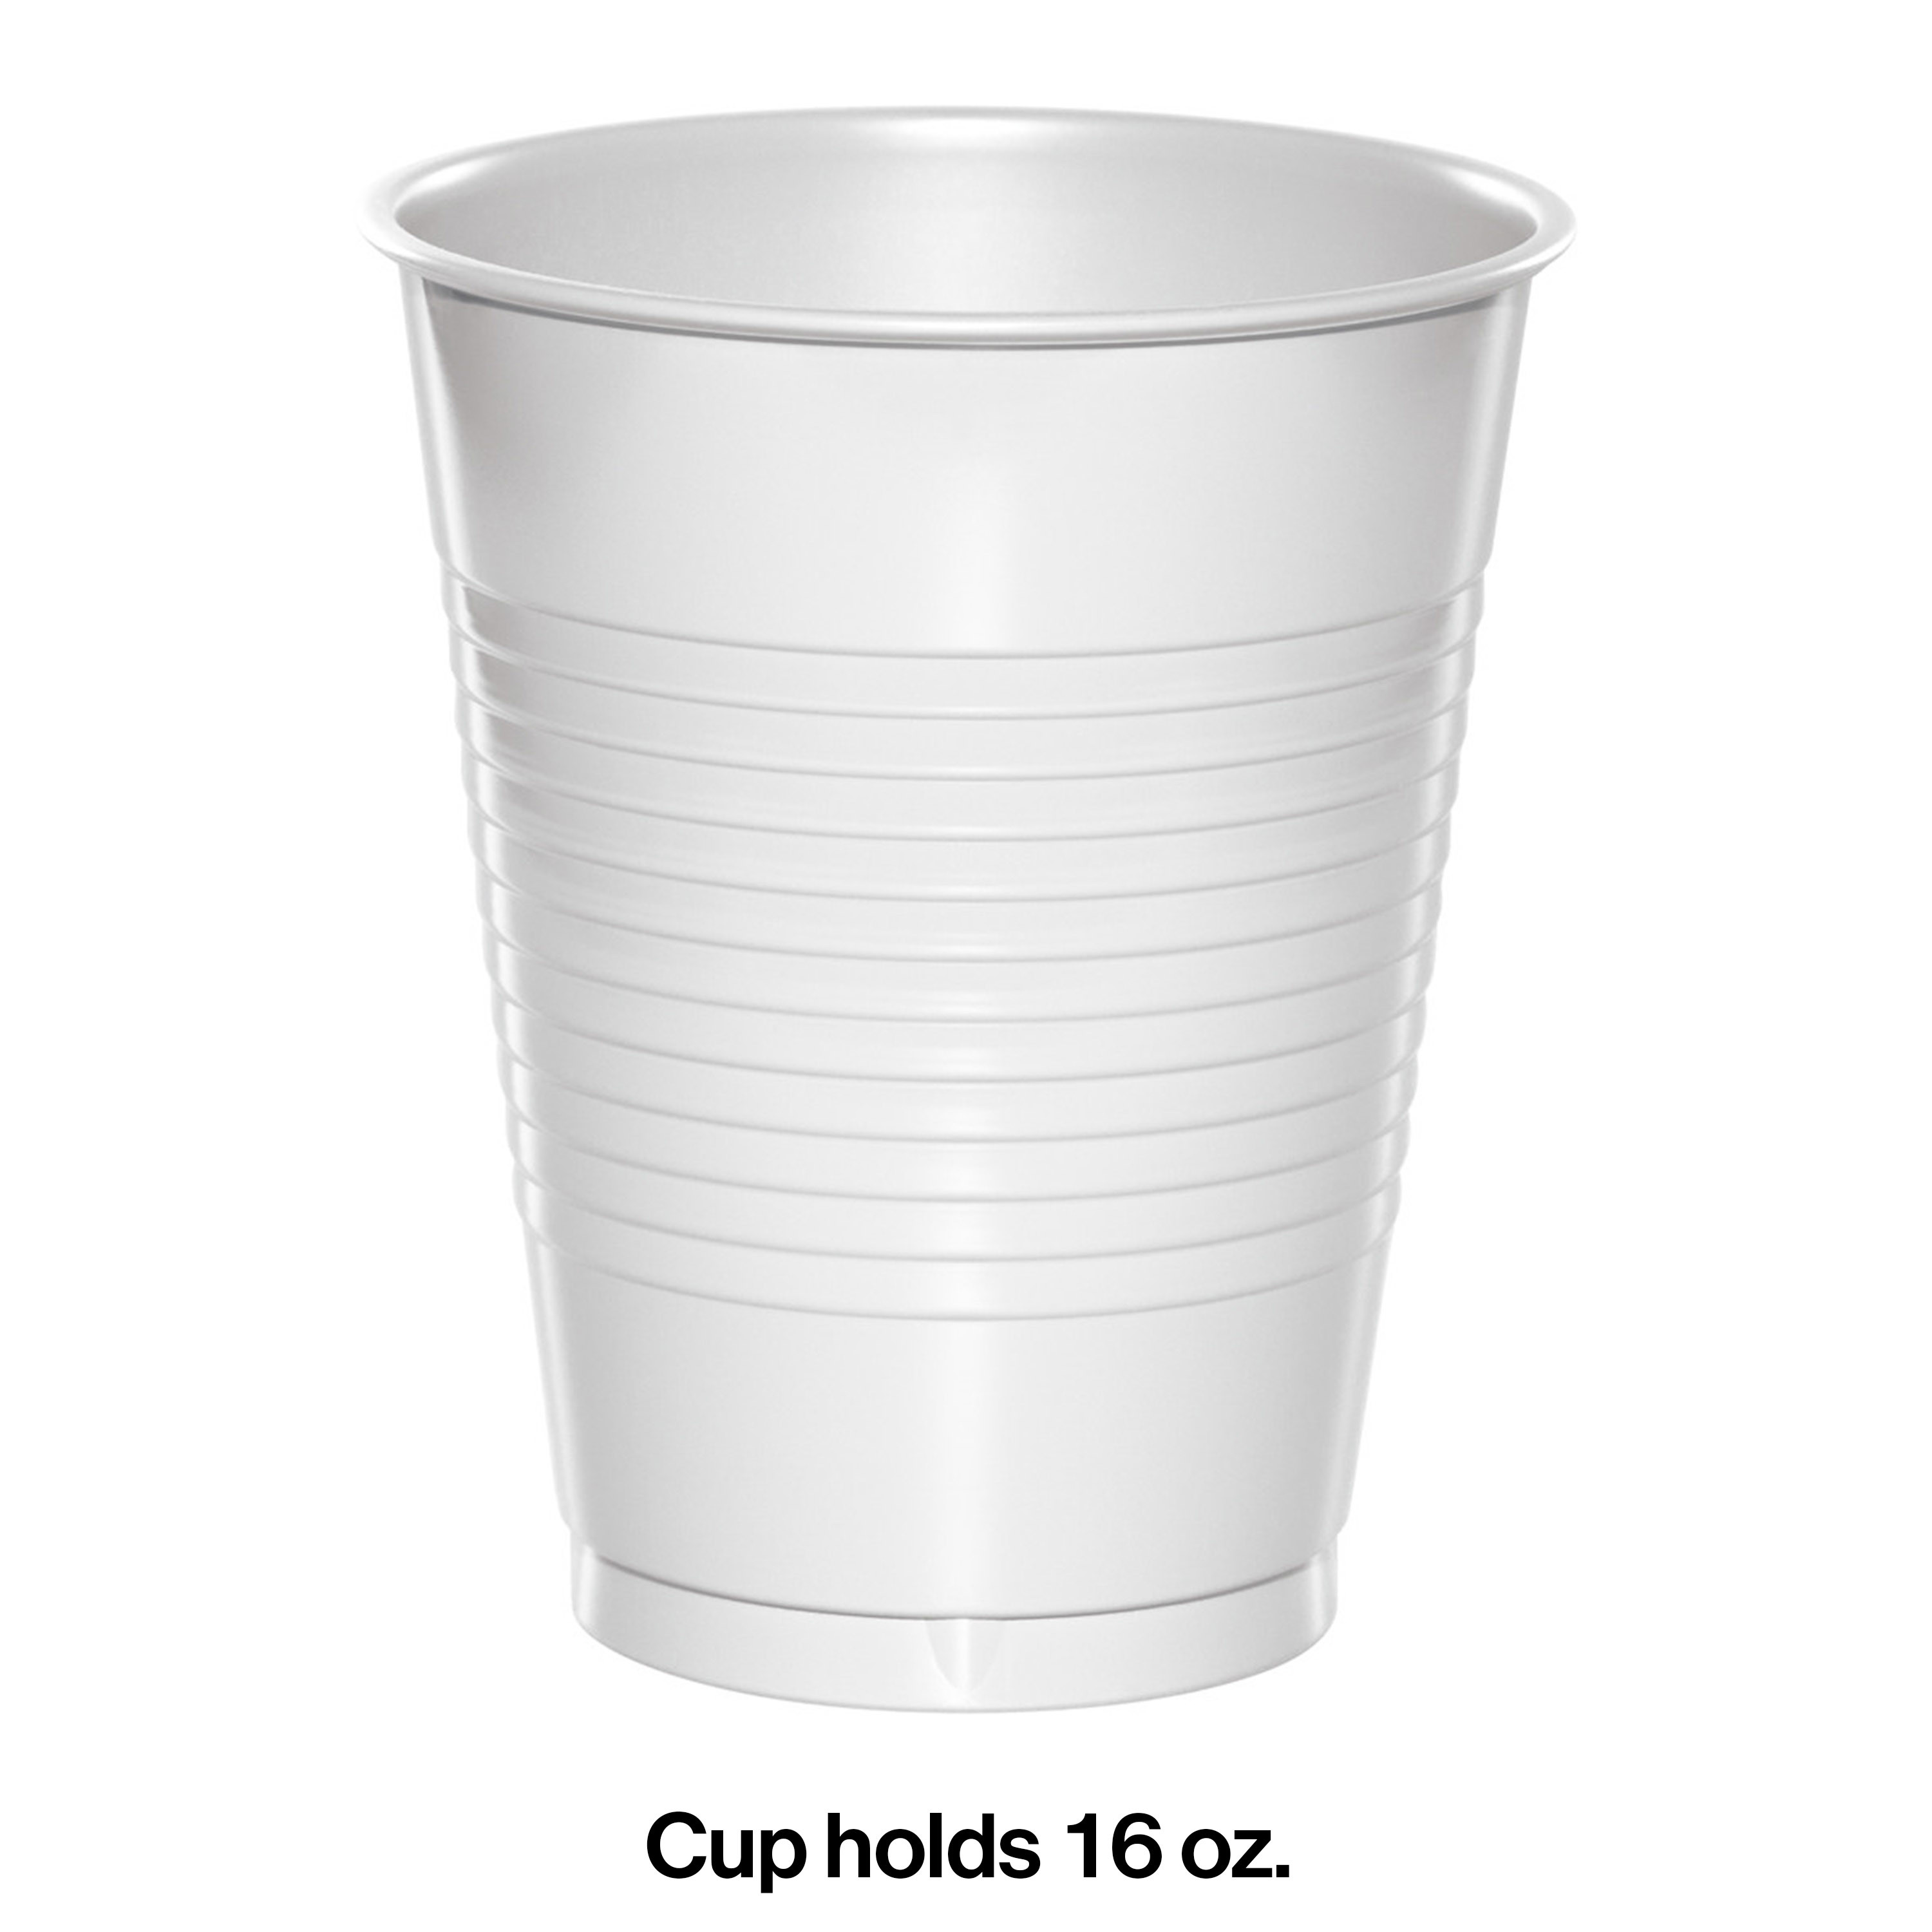 16 oz Solid Plastic Cups White,Pack of 20,3 packs